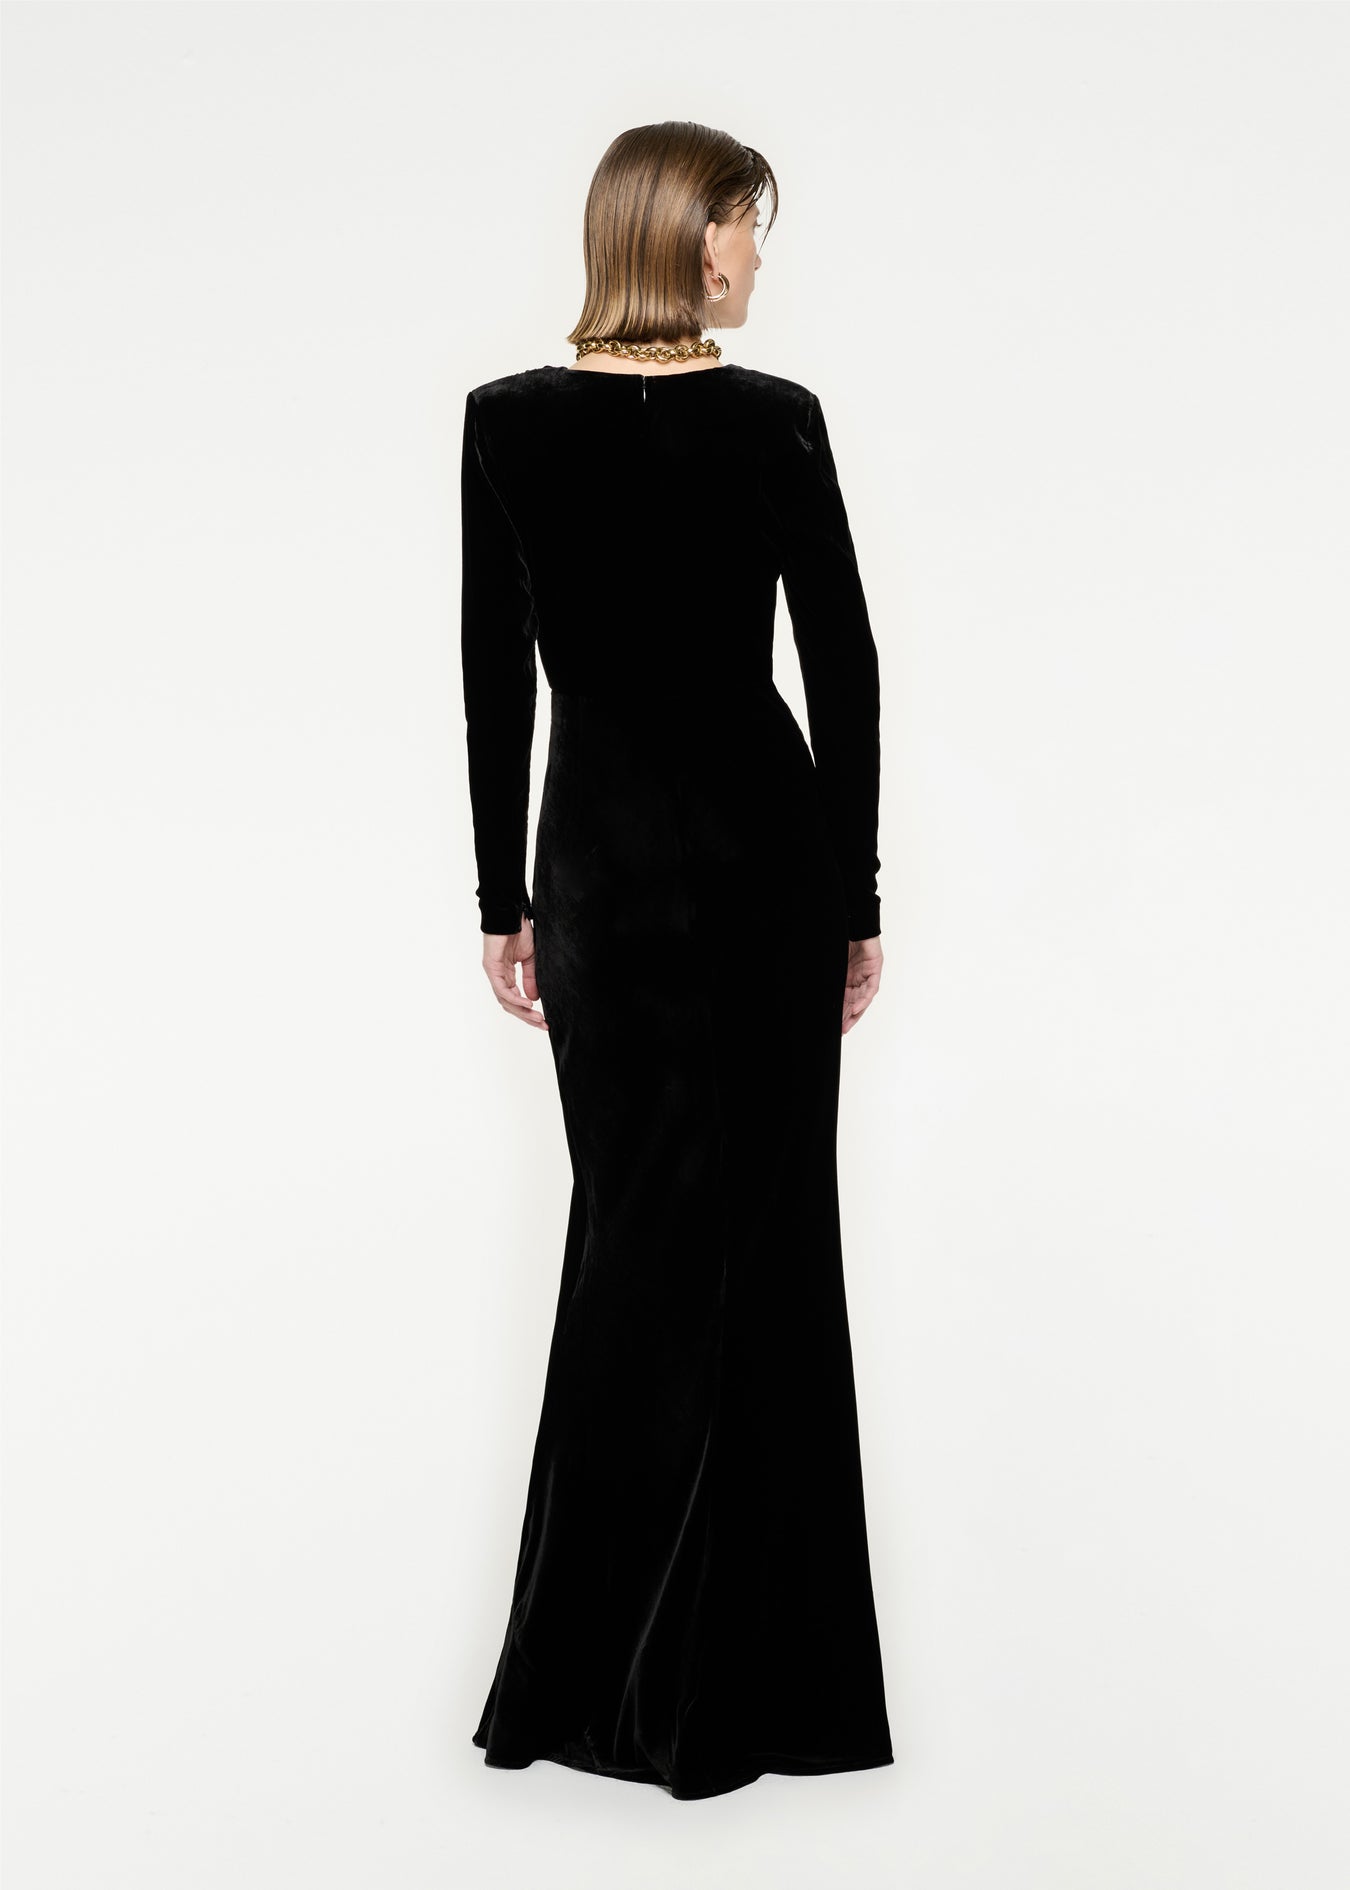 The back of a woman wearing the Long Sleeve Velvet Maxi Dress in Black